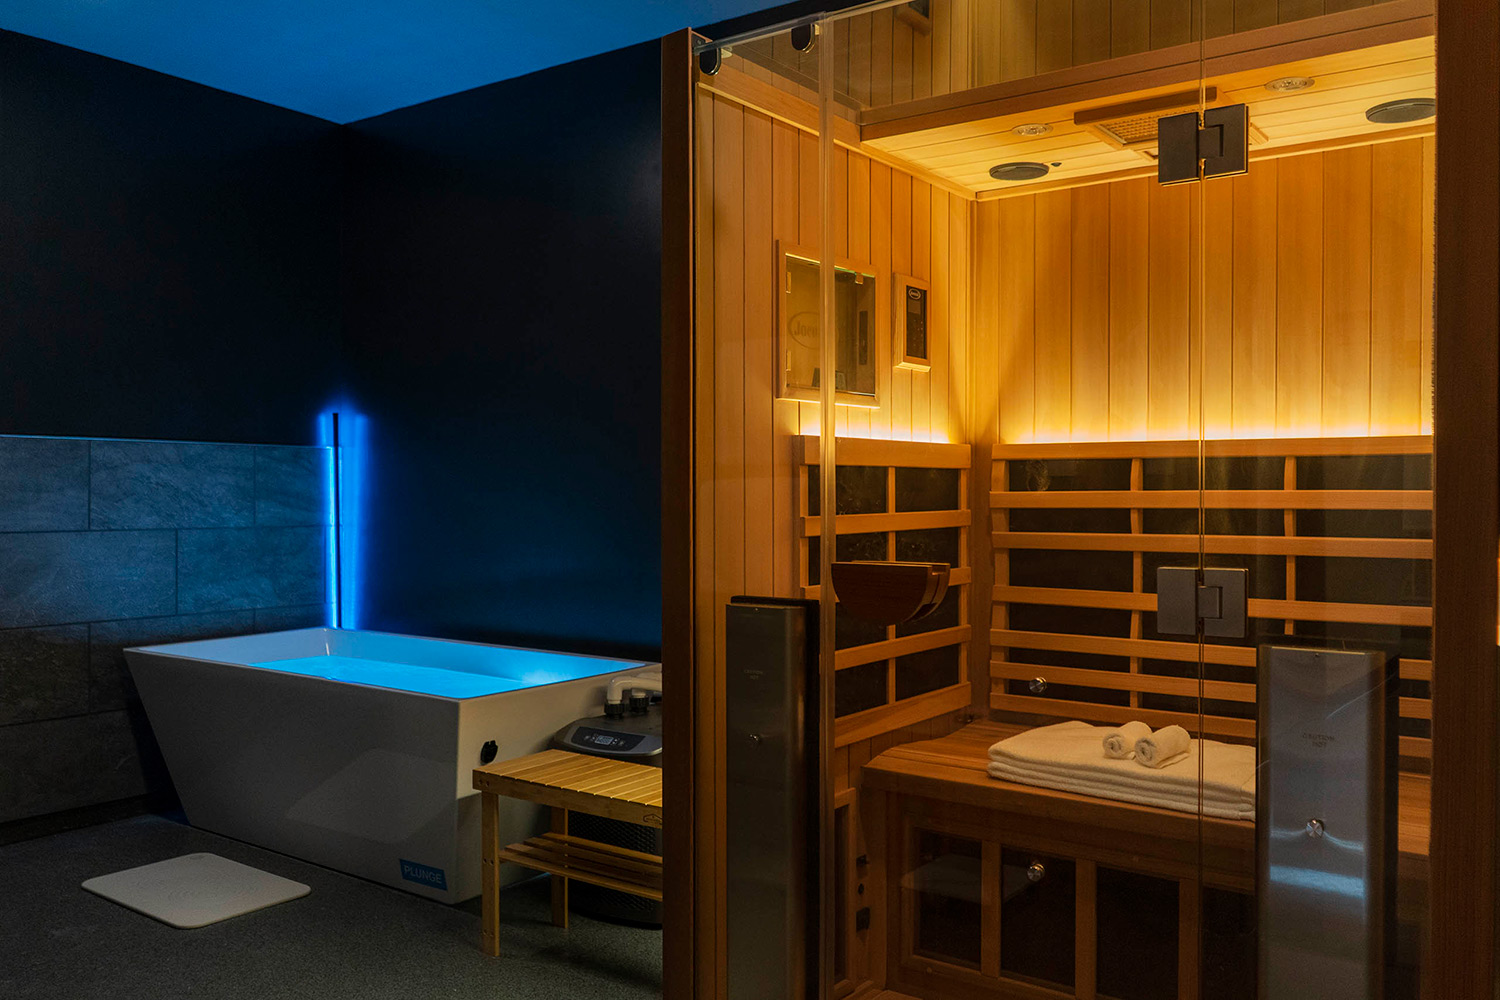 Fire and ice - our infrared sauna, and our ice bath.